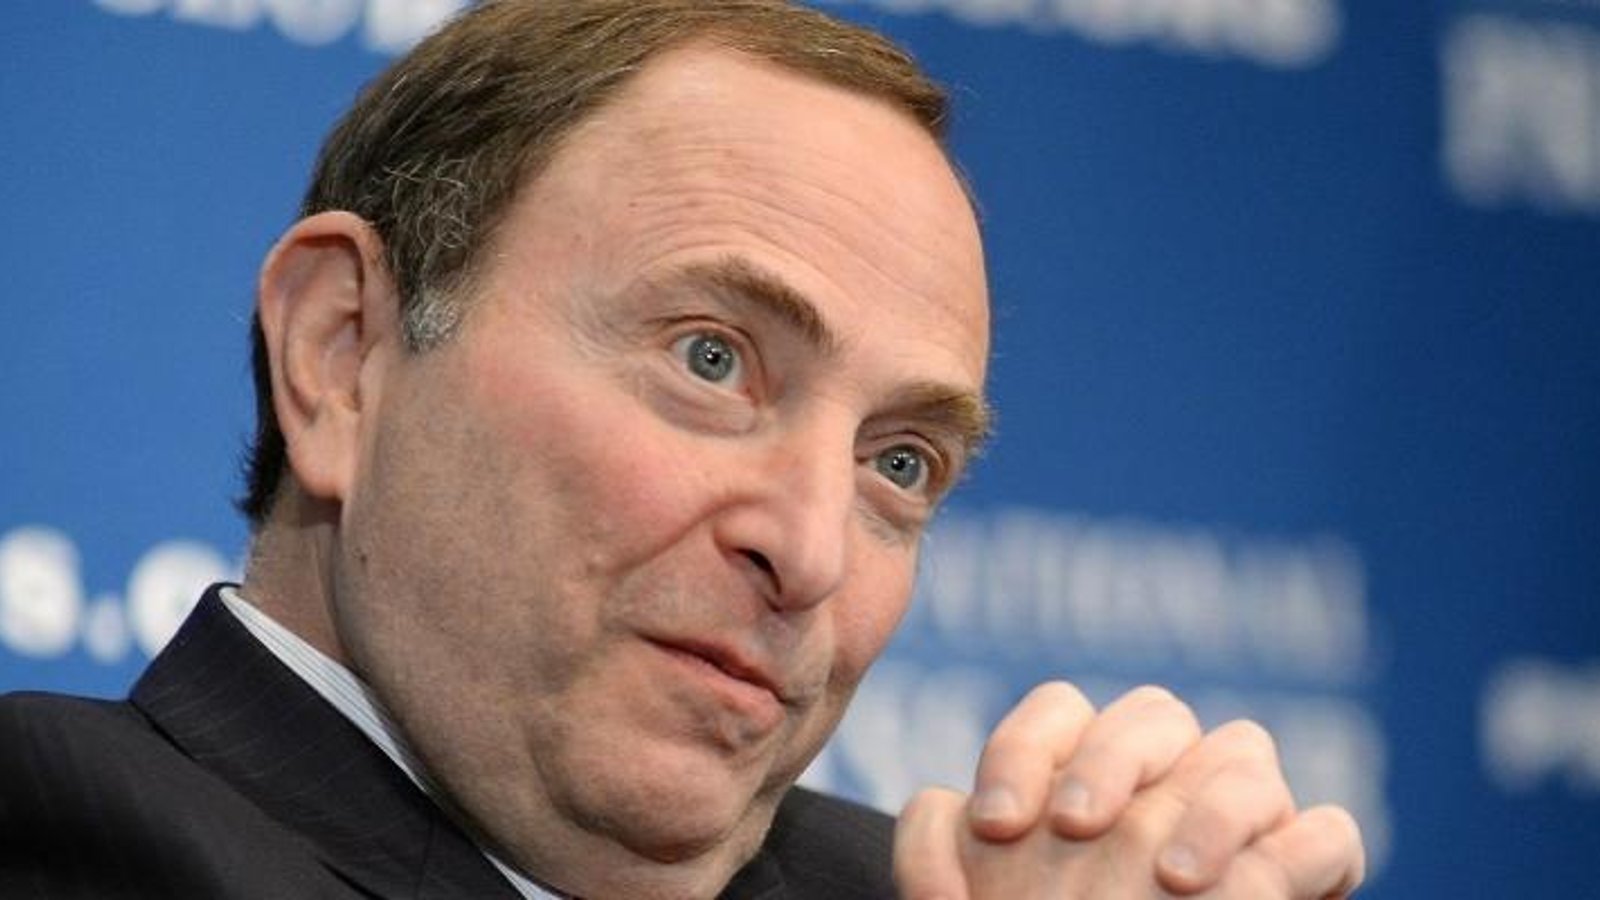 Rumors of a potentially major surprise at today's NHL expansion announcement.